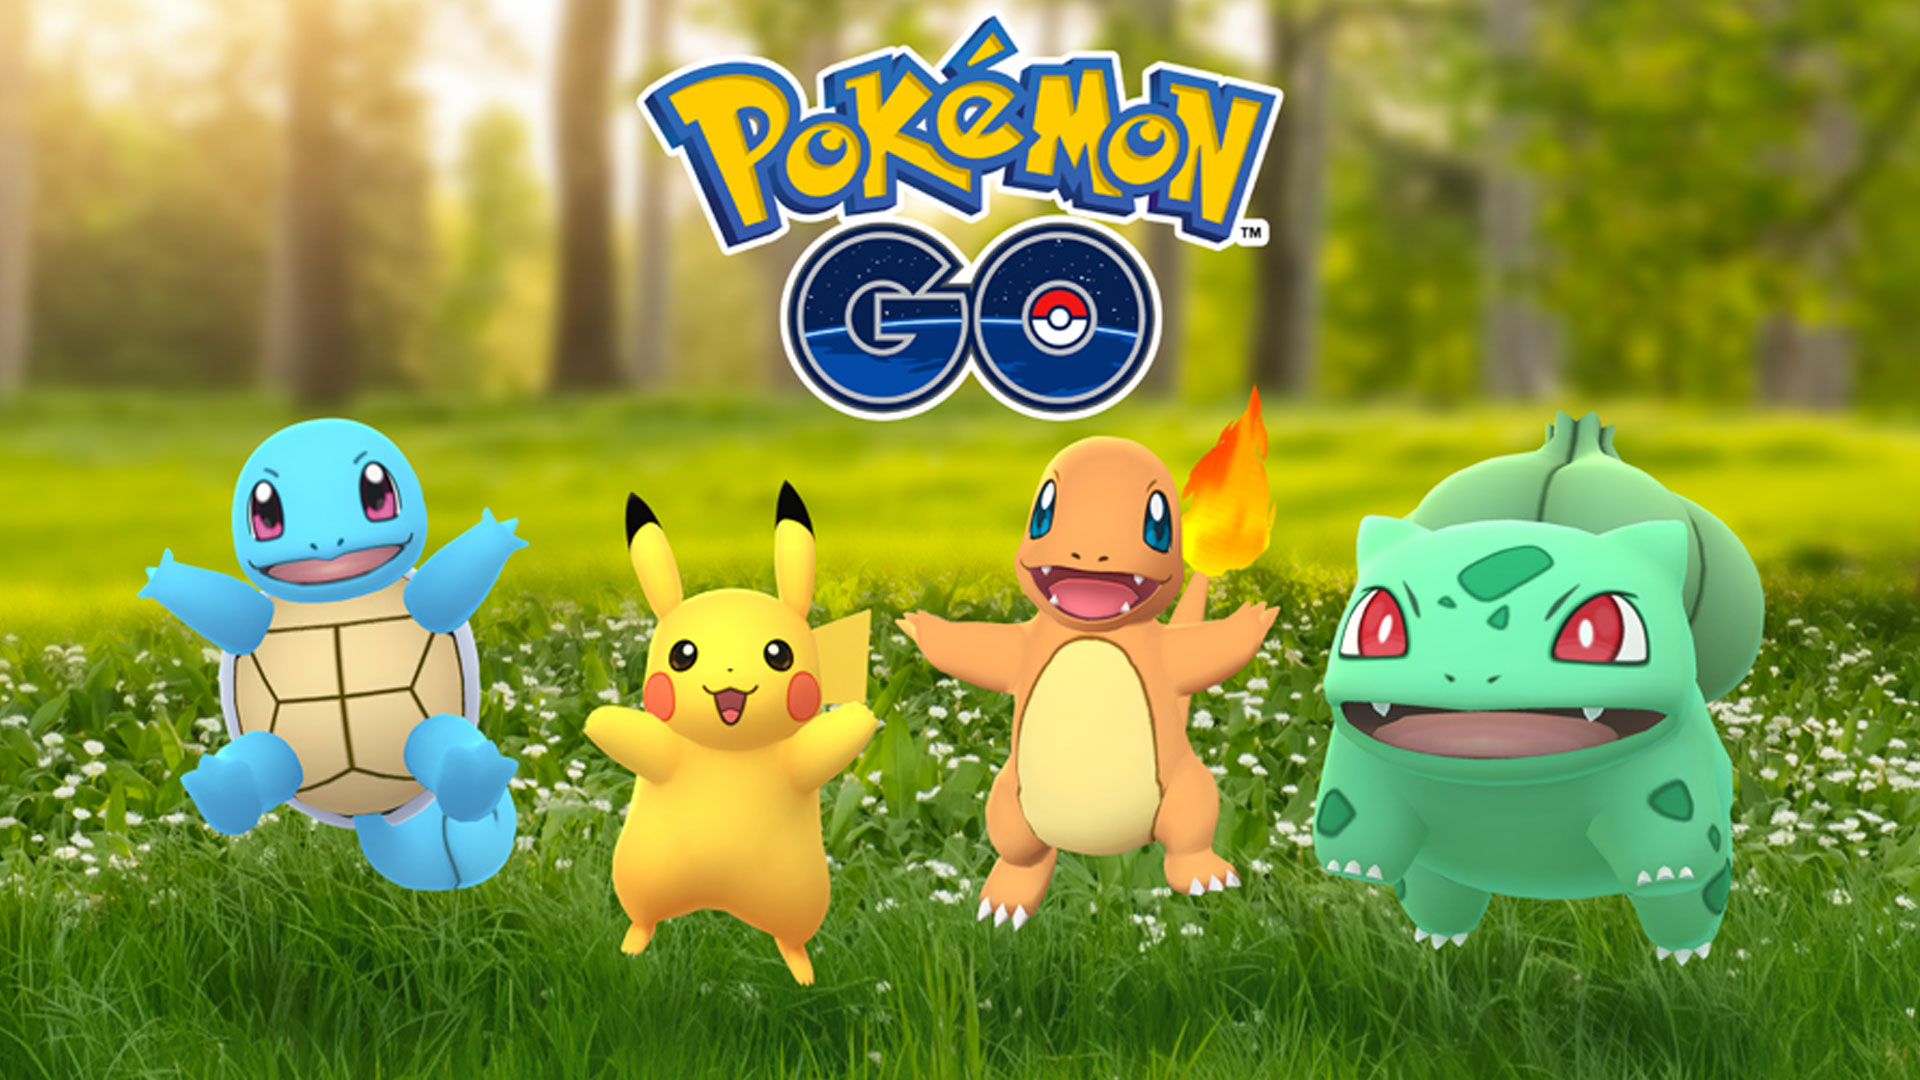 Pokemon Go’s Appraisal System Is Getting An Update, The Change Will Make Checking Pokemon Quality Easier For All Players